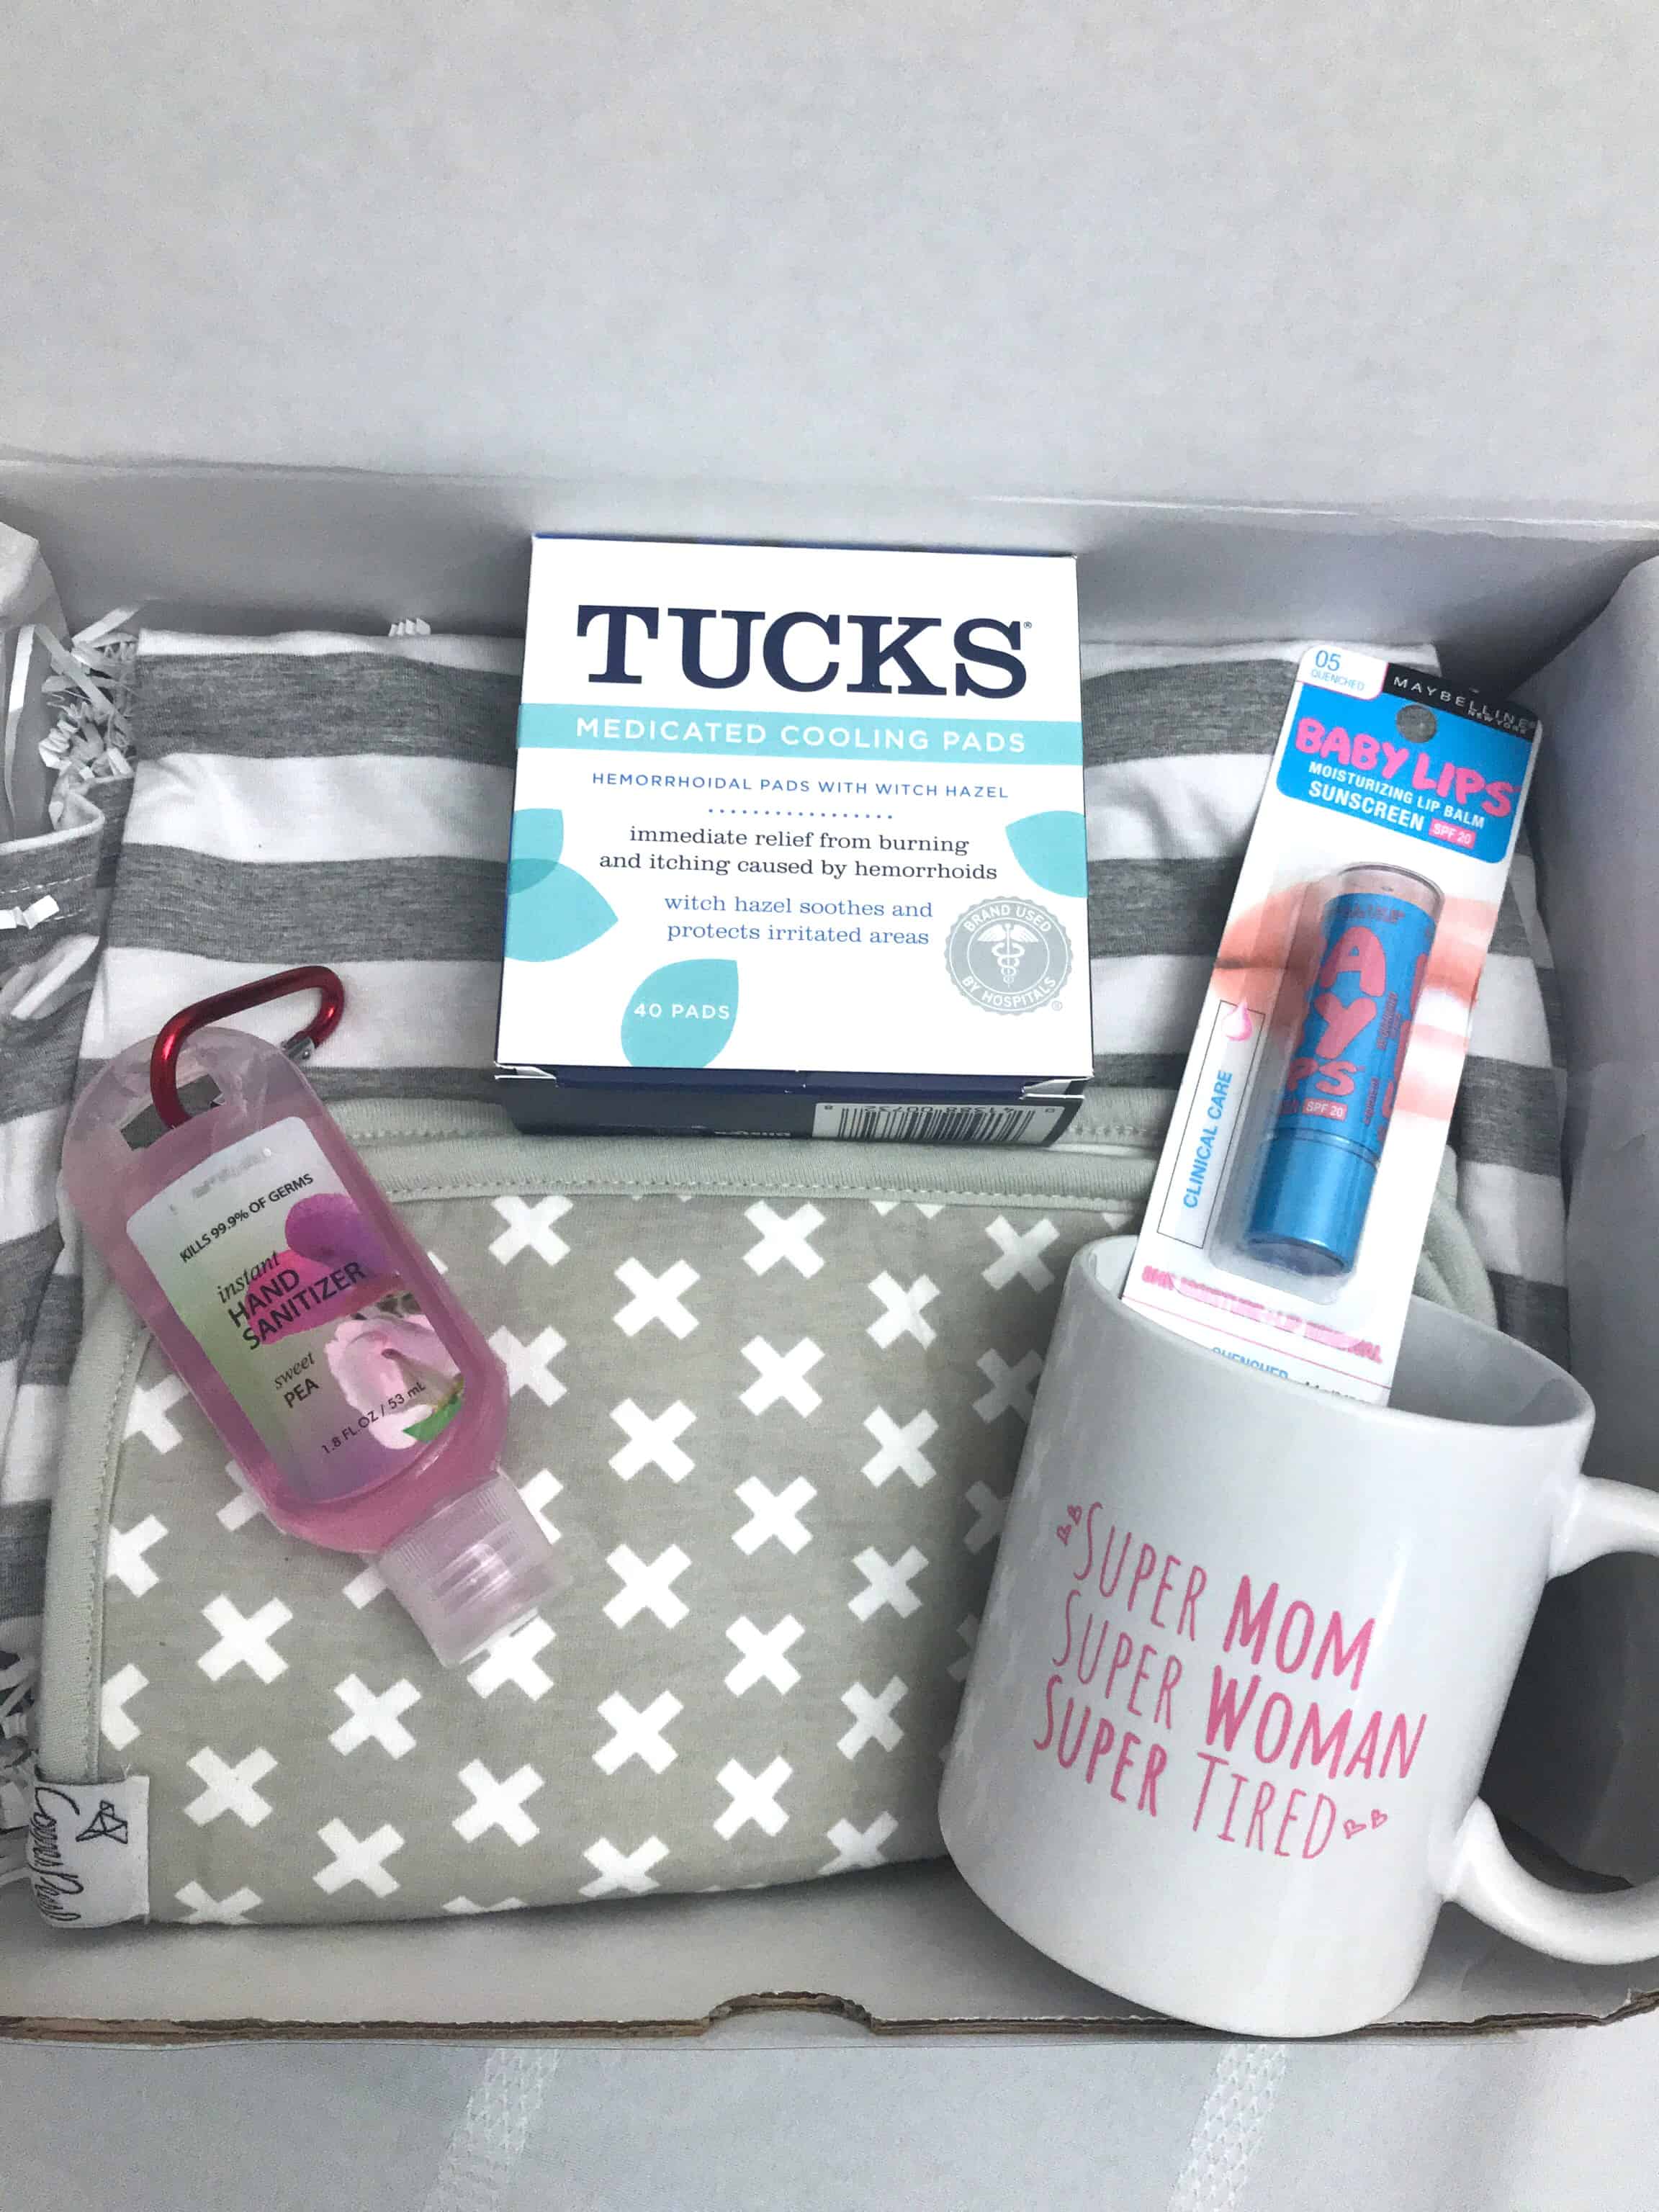 Awesome and cute must have ideas for a gift basket for mom and new baby. Unique ways to support a new mom and provide encouragement during pregnancy and the postpartum phase. #sponsored #newmoms #postpartum #newbaby #pregnancytips